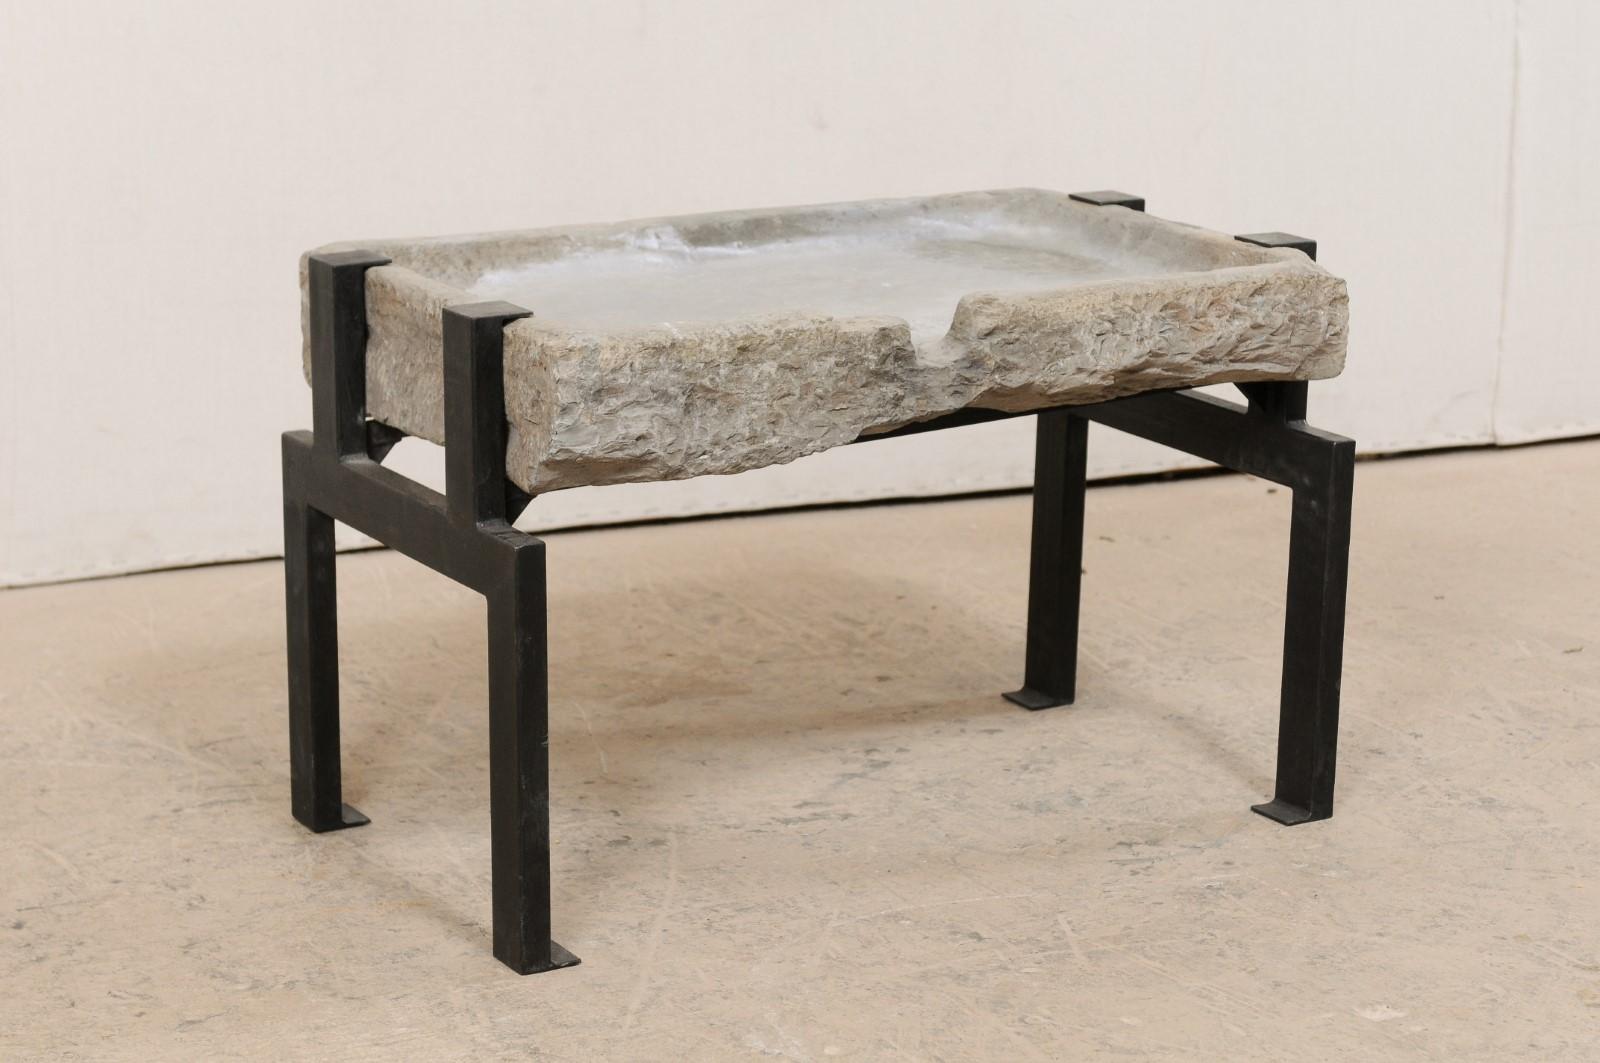 A 19th century Spanish stone trough top coffee table. This smaller-sized table has been custom fashioned from a 19th century Spanish stone trough, having an overall rectangular-shape, and drain spout located at one longer side. The trough has been